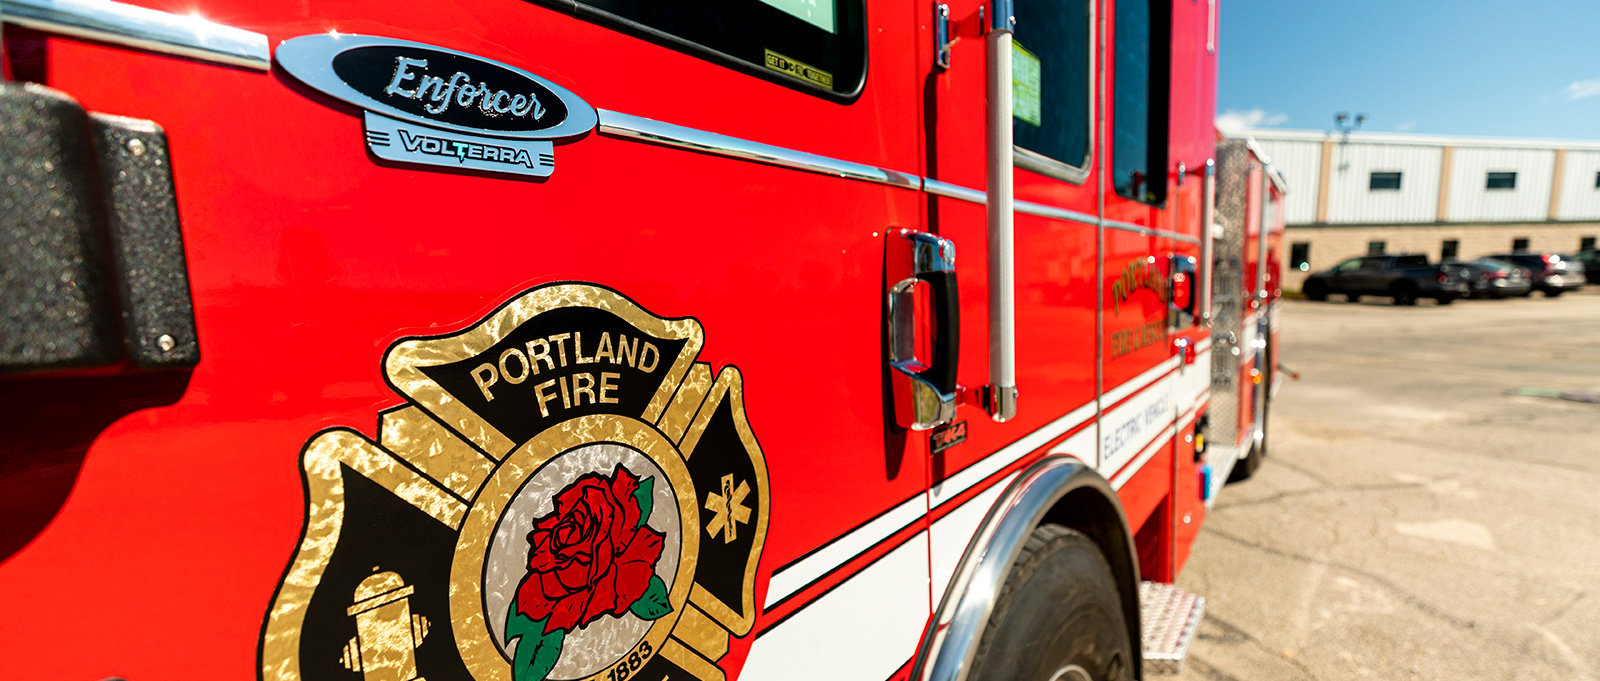 A close-up image shows the diver side panel of the Portland Fire Rescue electric fire truck with the emblem. 